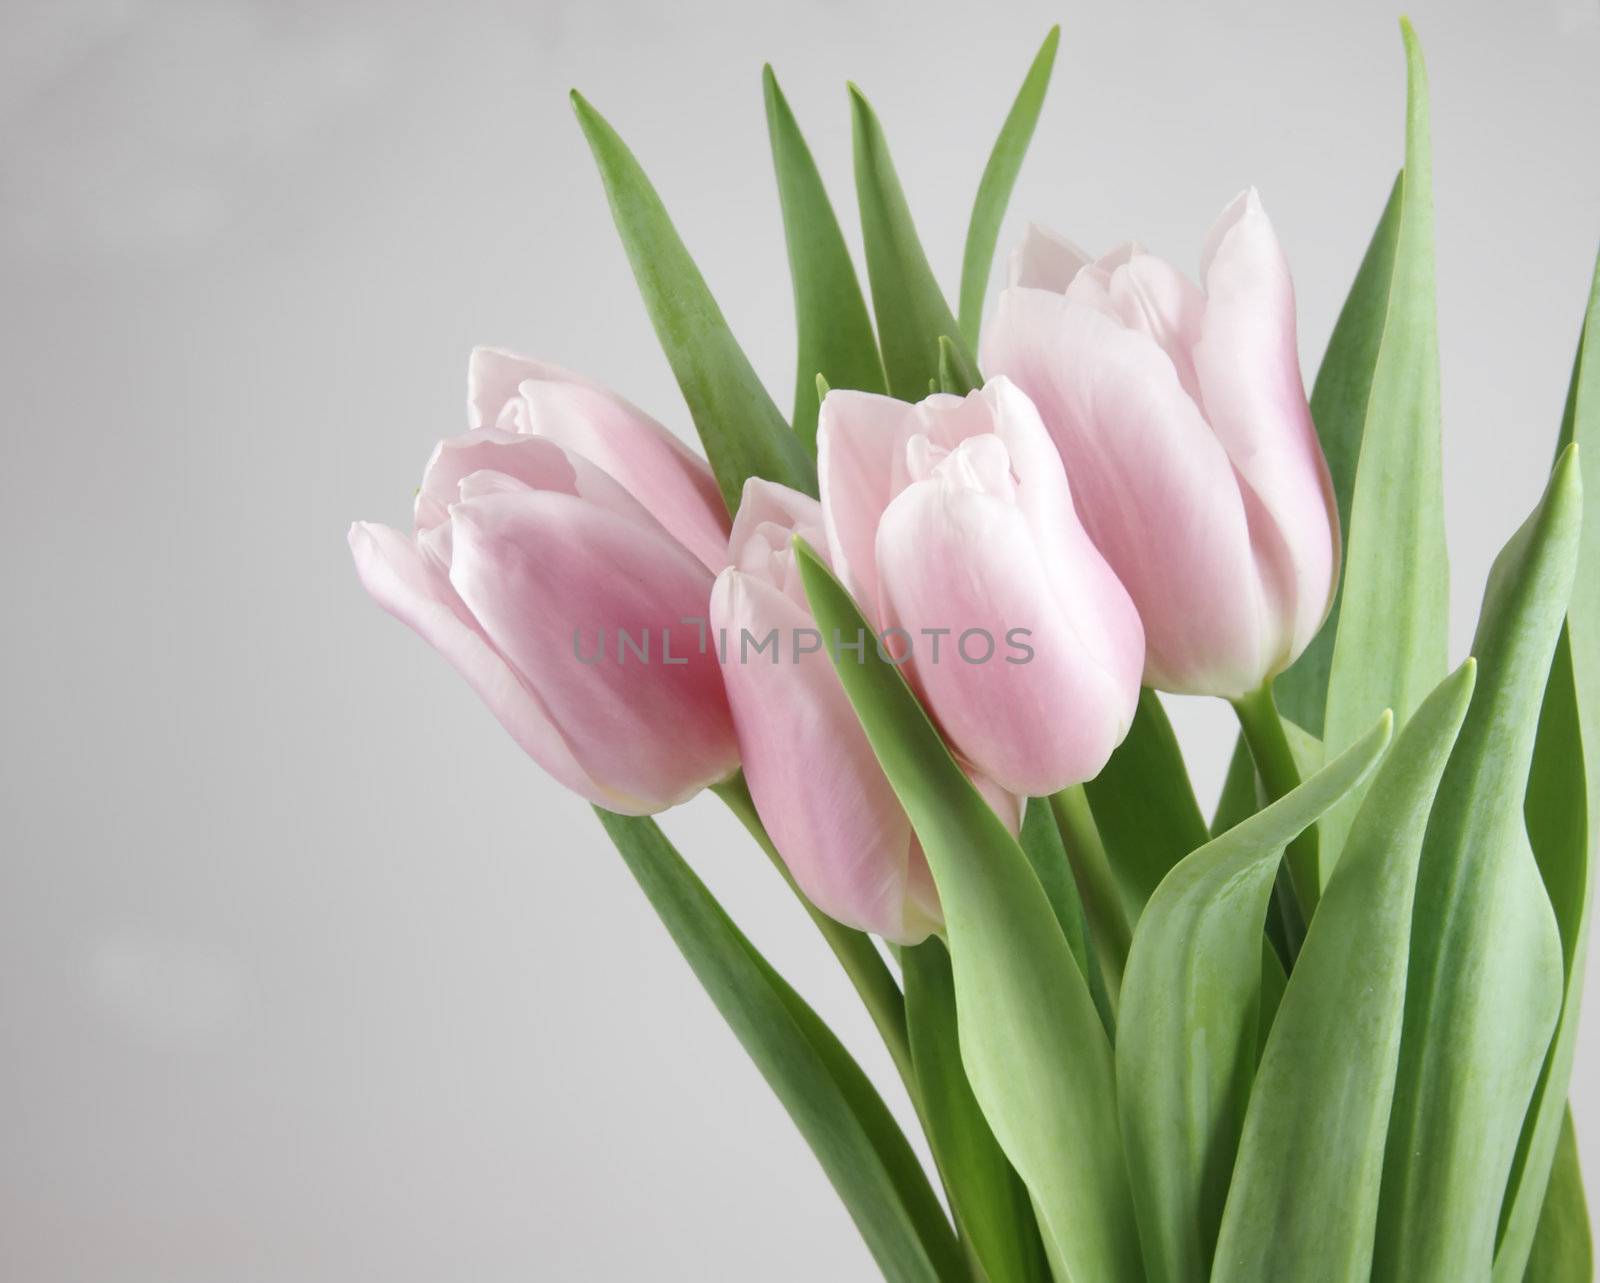 Pinky-white tulips by serpl